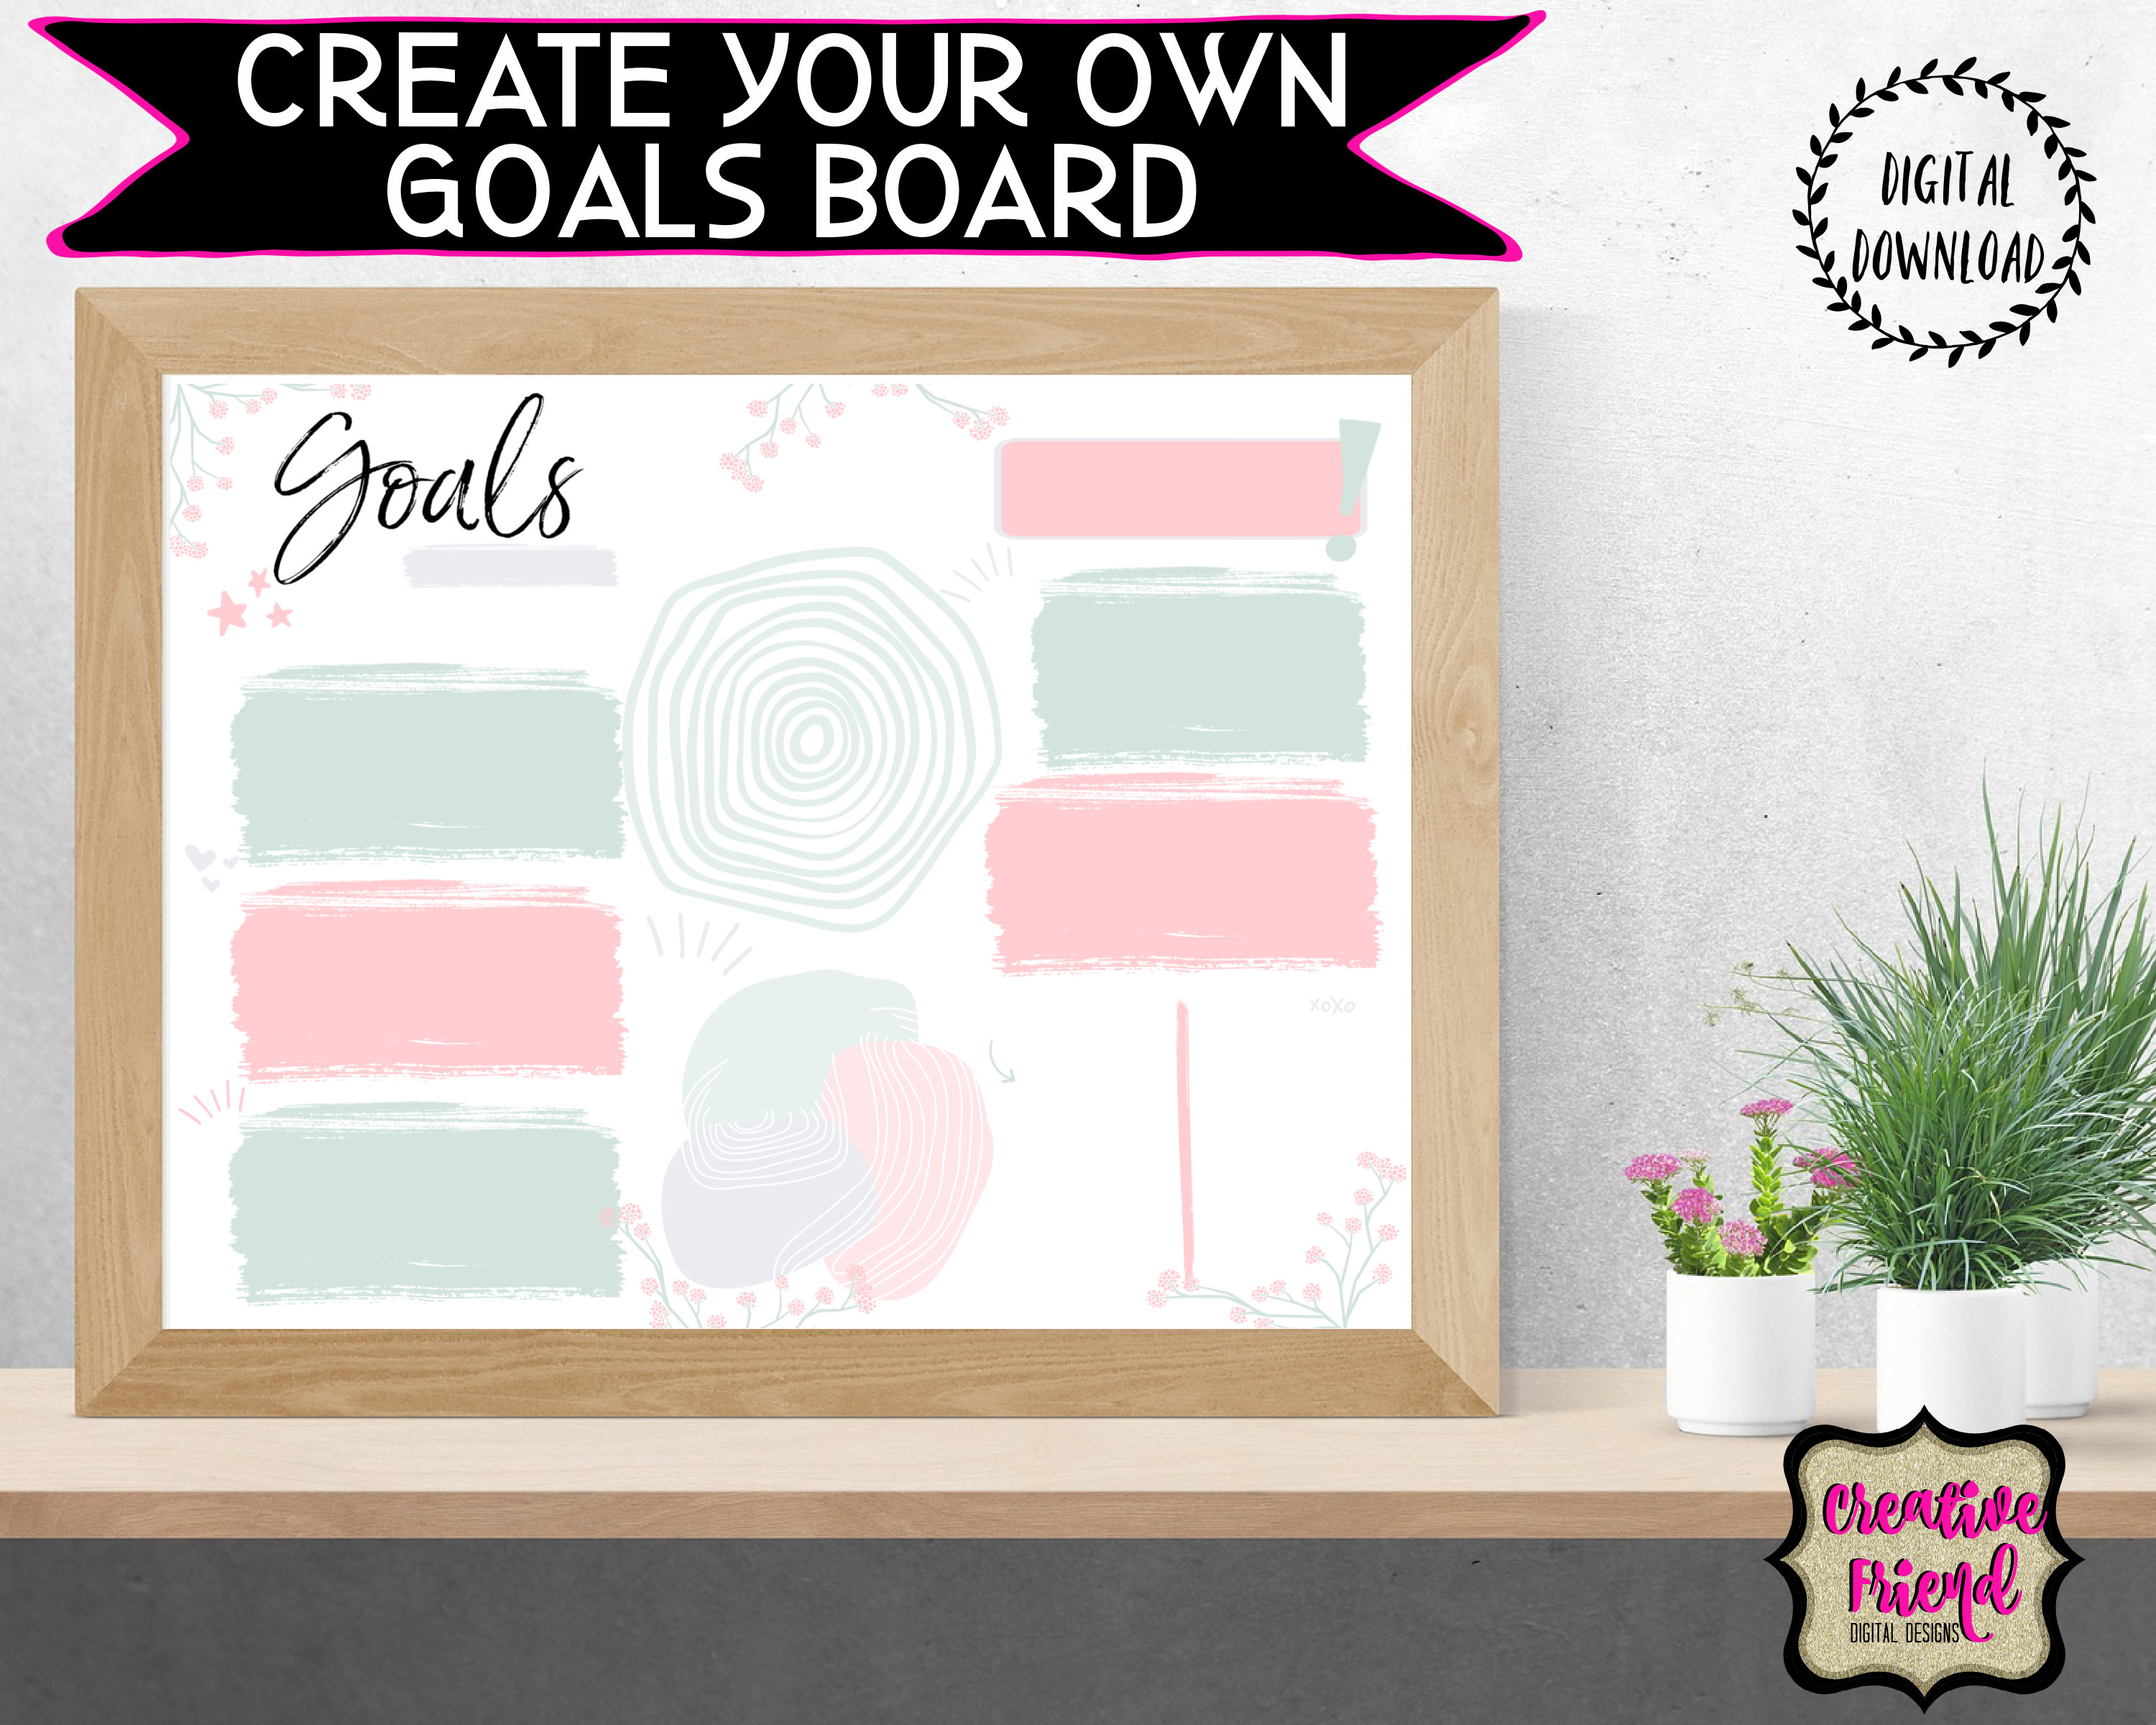 Stay focused and organized with this DIY Goal Board. Keep weekly